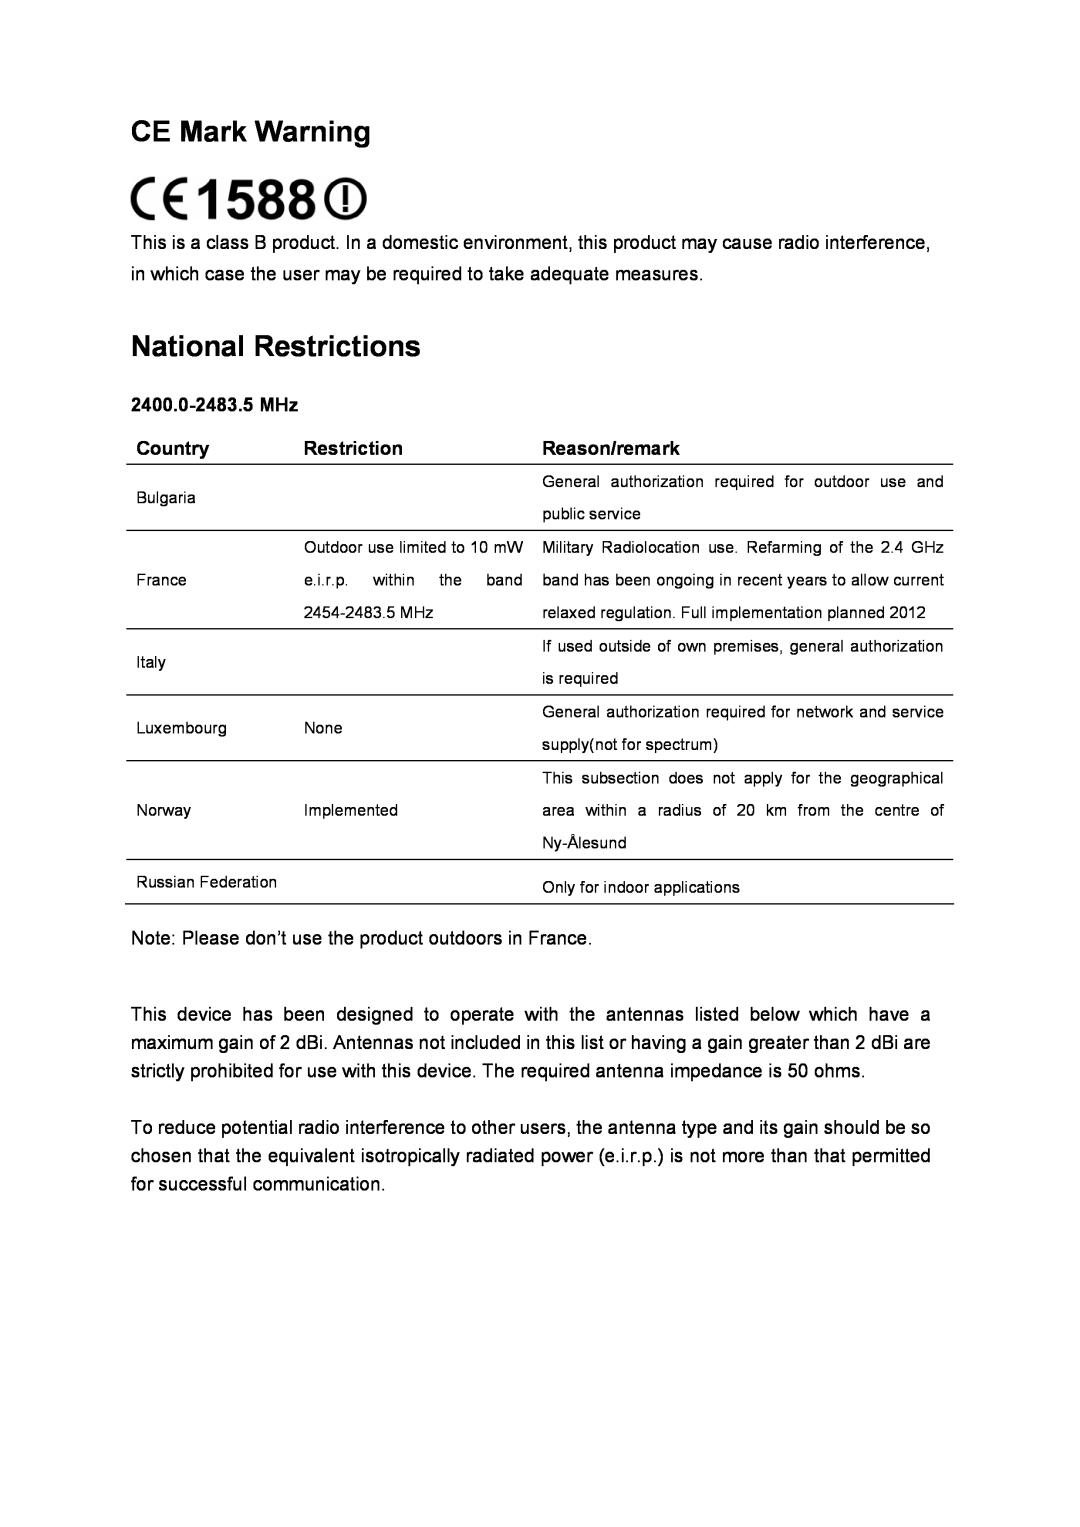 TP-Link TL-WN881ND manual CE Mark Warning, National Restrictions, 2400.0-2483.5 MHz, Country, Reason/remark 